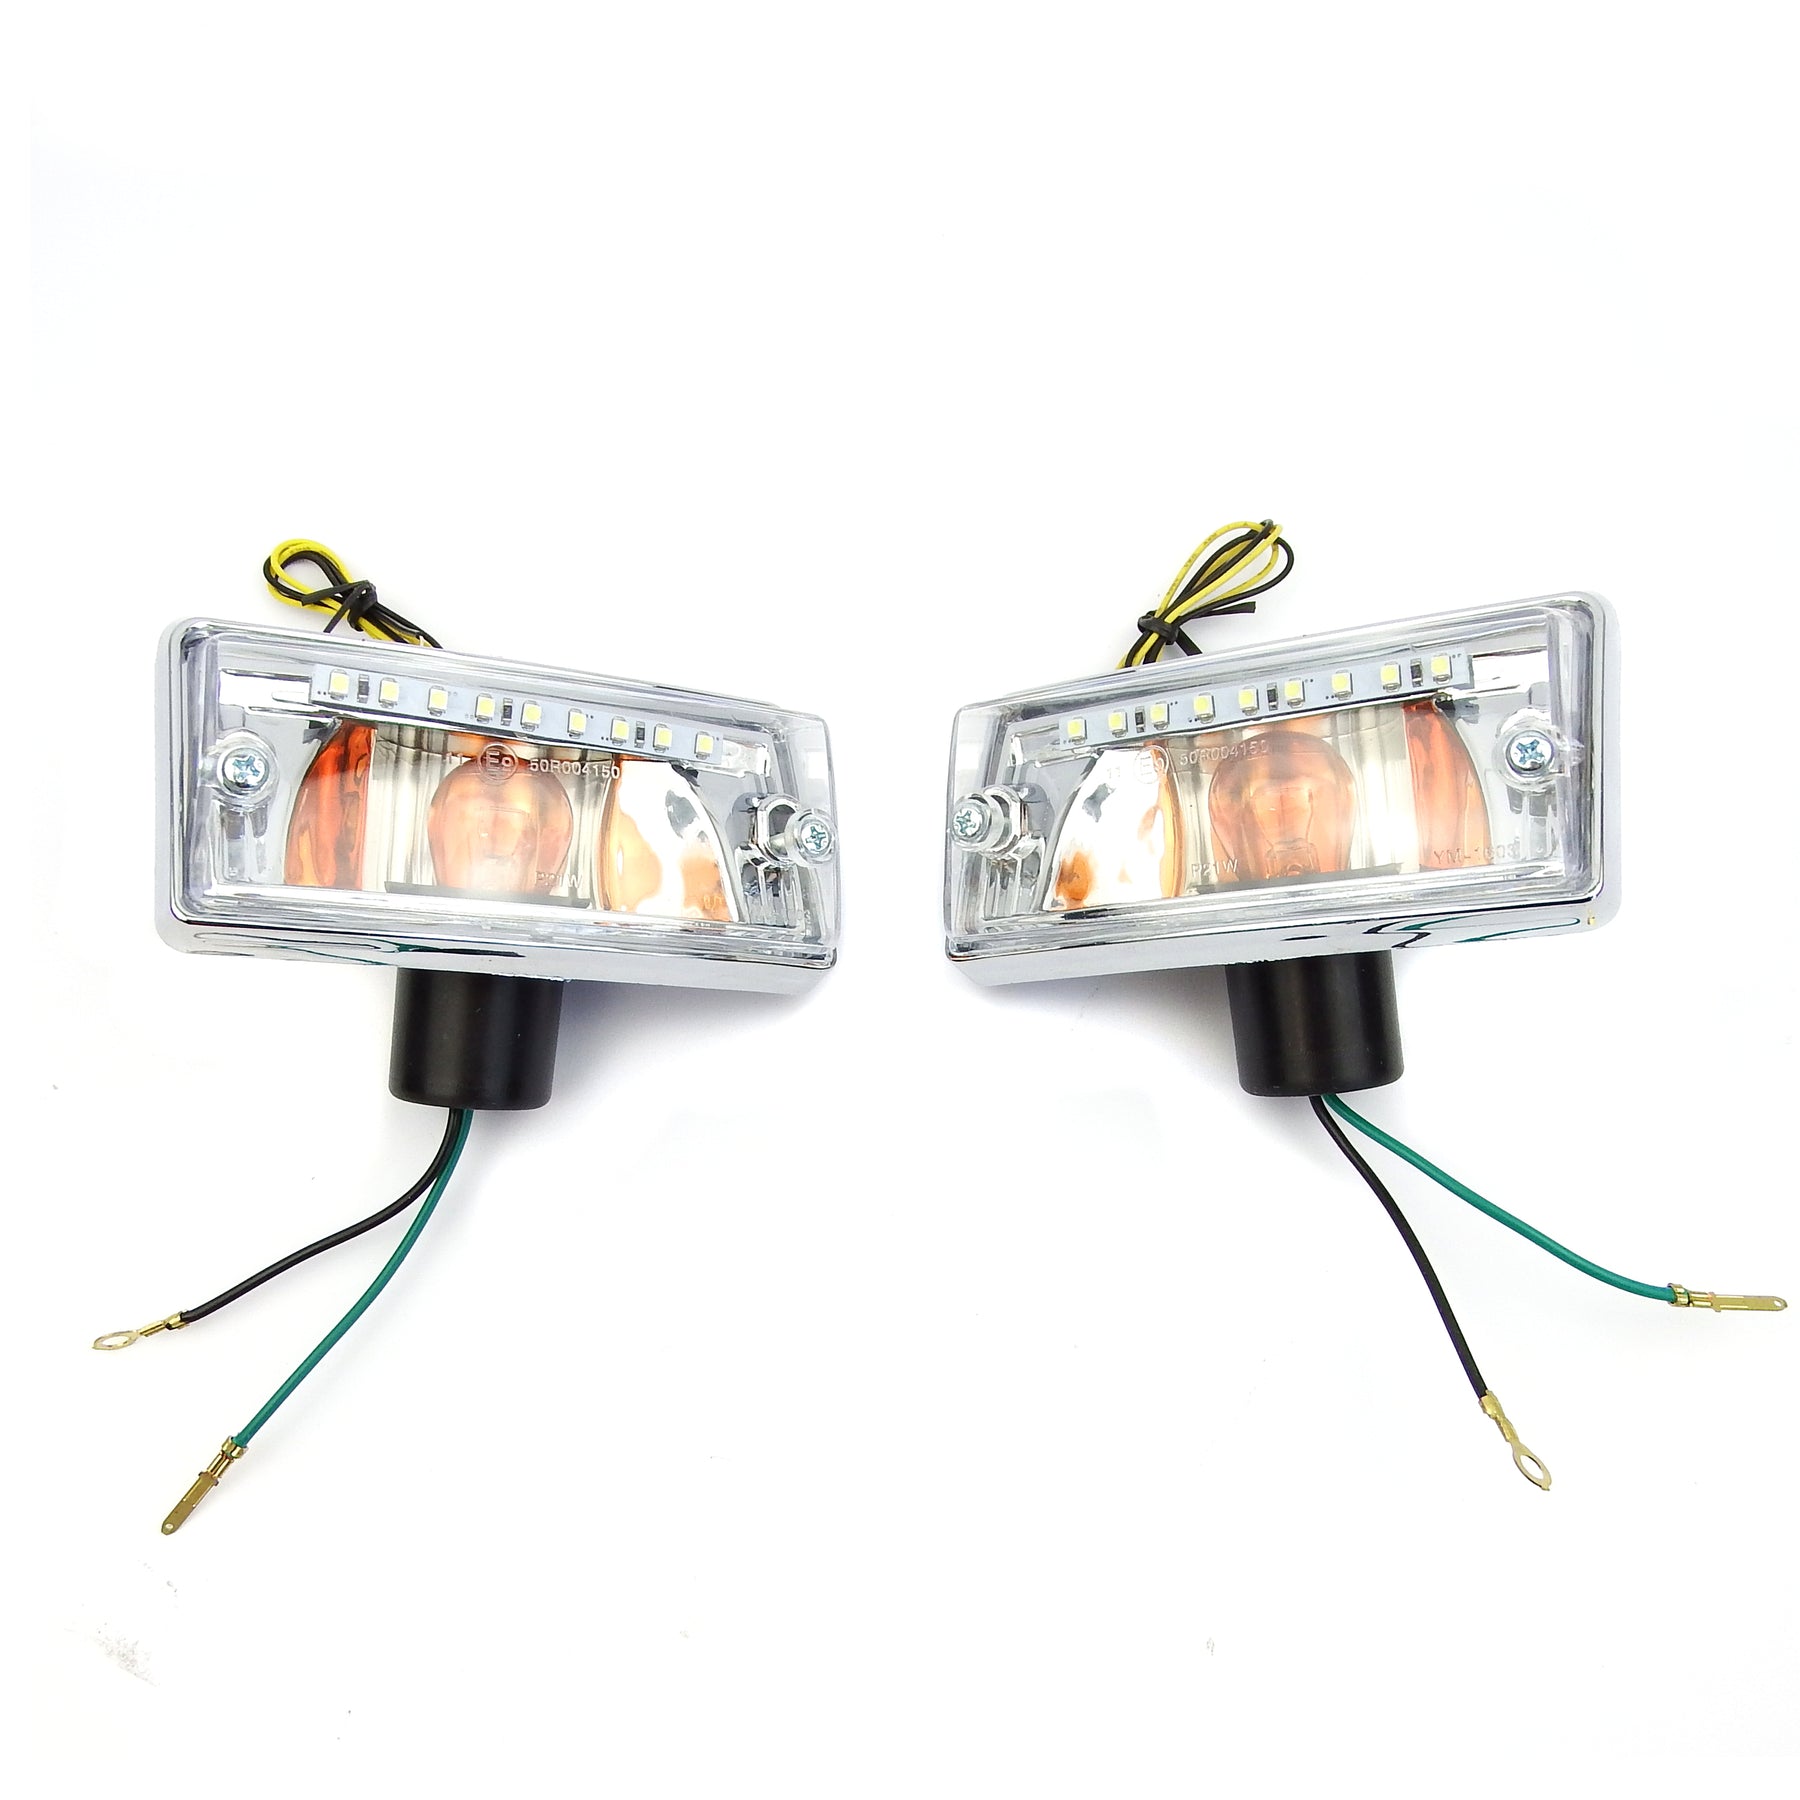 Vespa PX PE T5 LML Lexus Style Indicator Units With Built In LED Running Lights